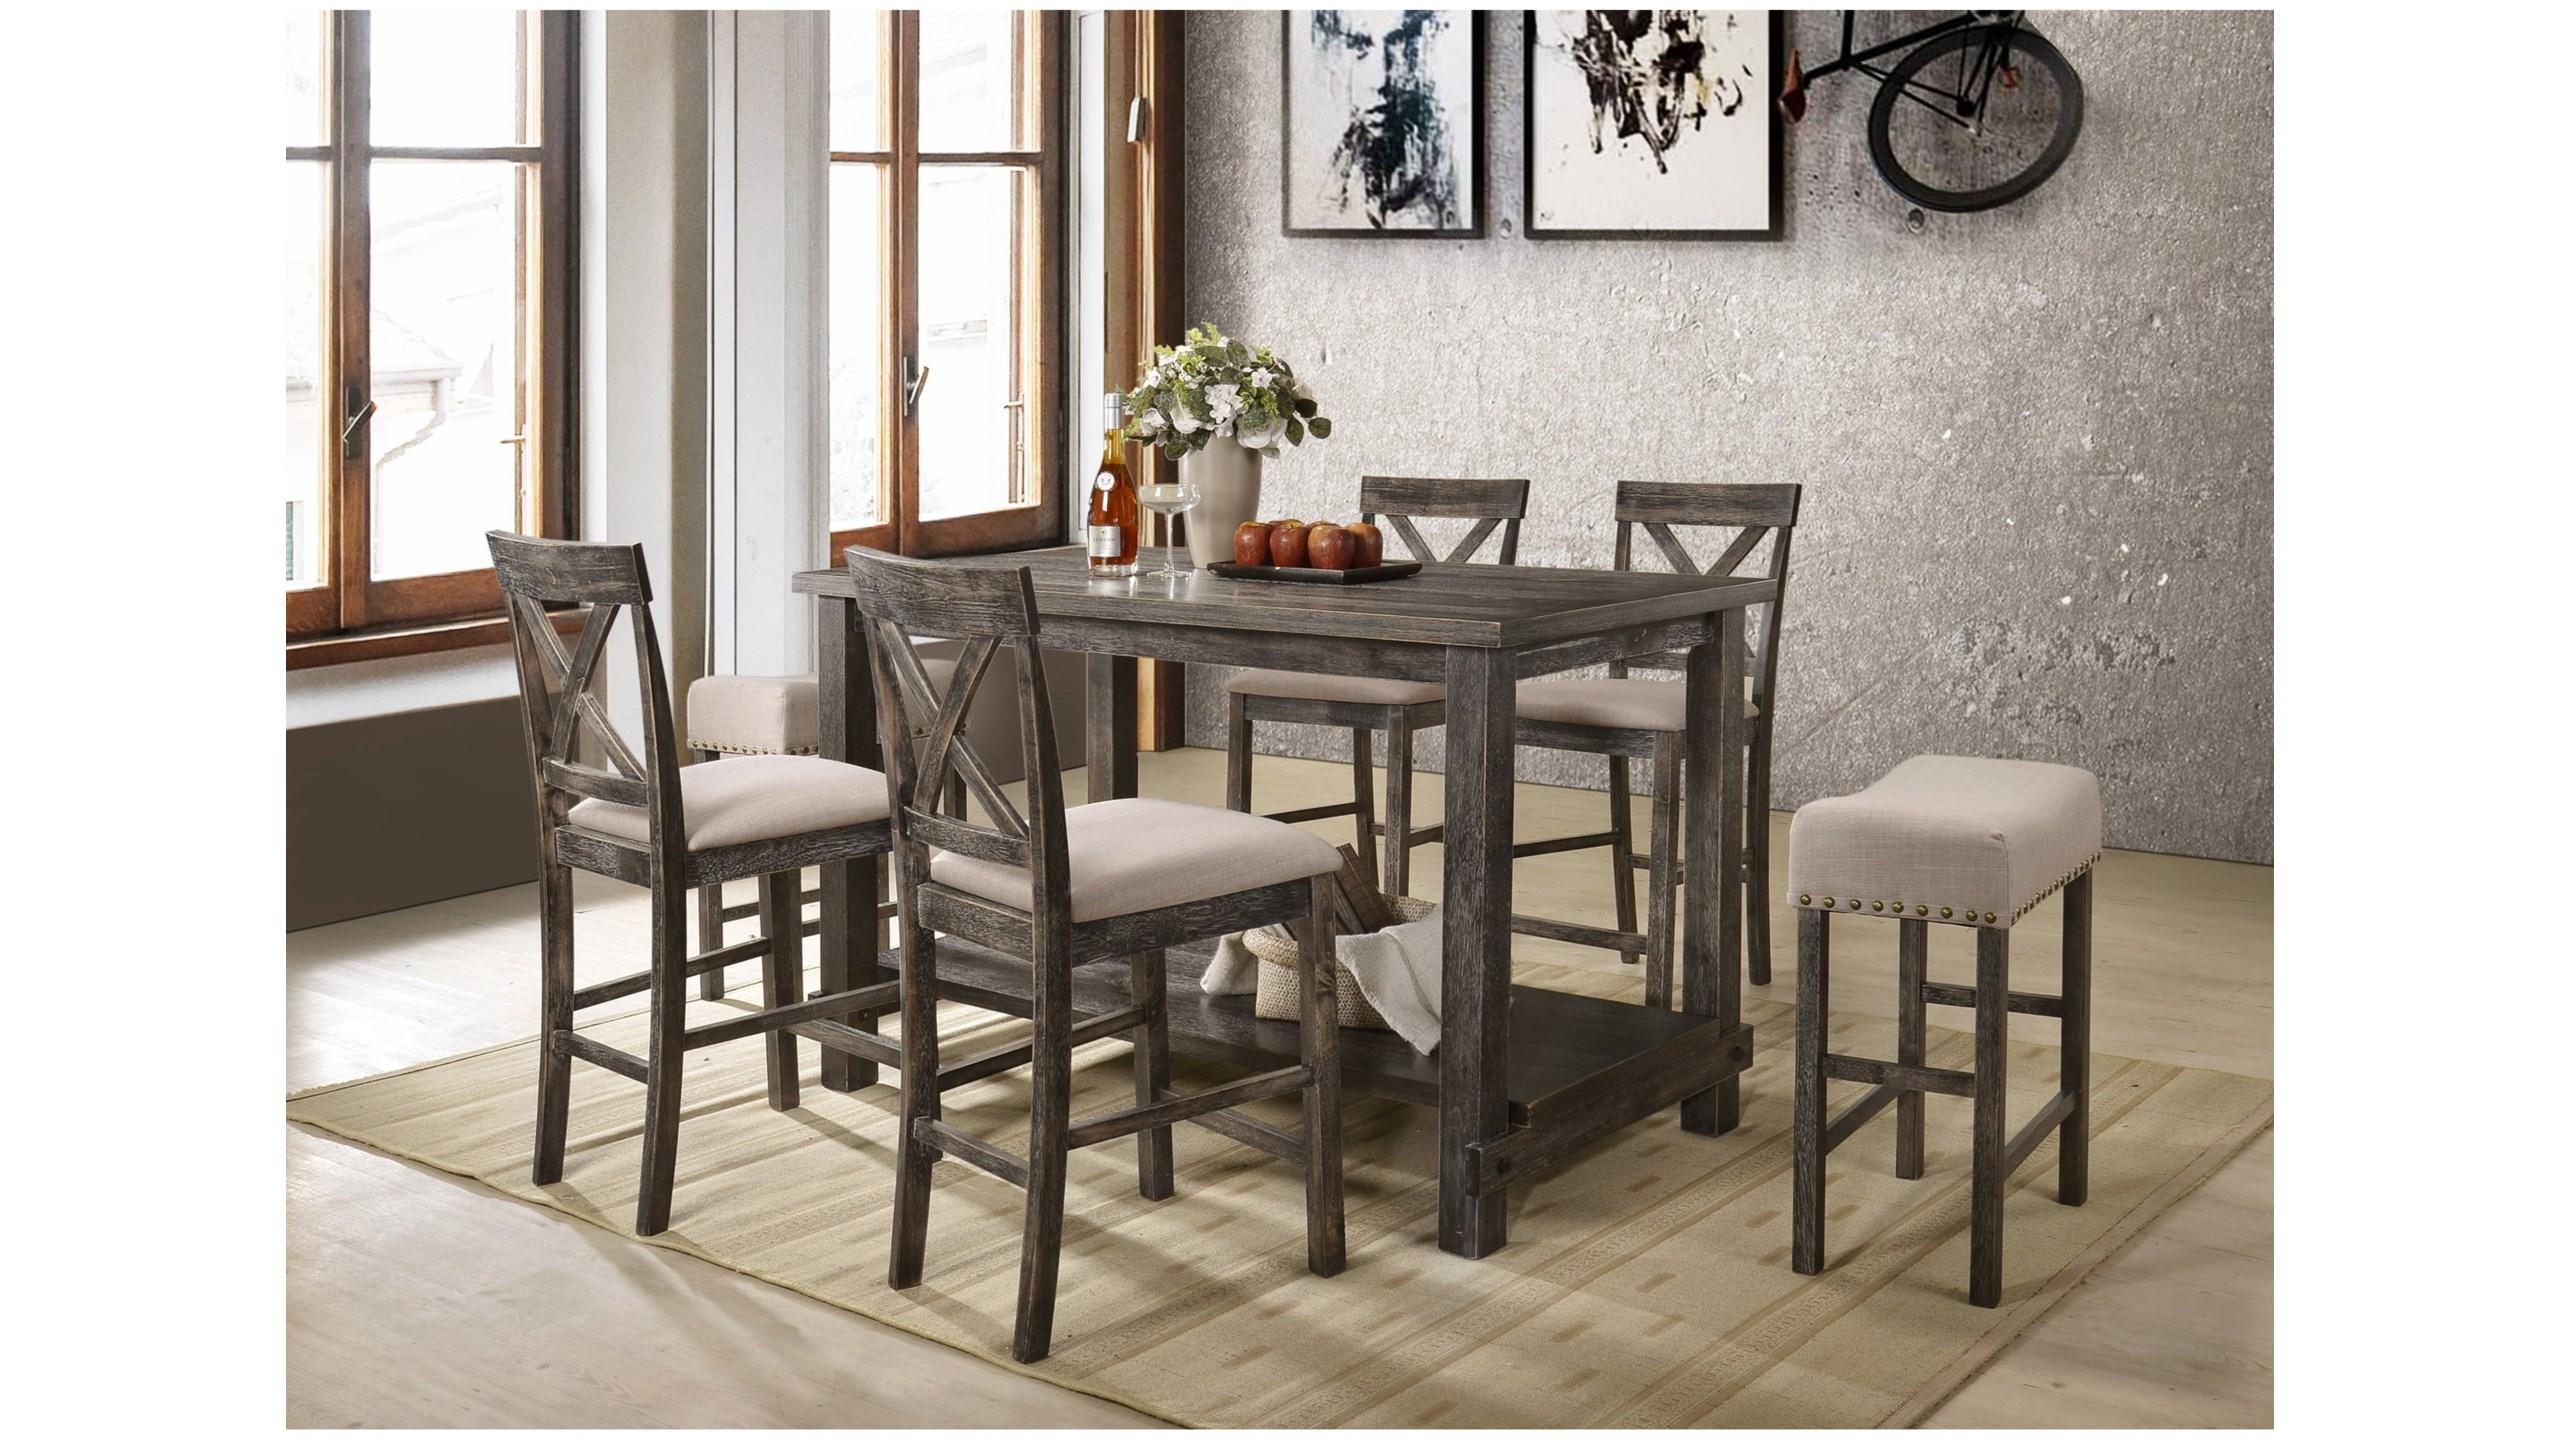 Classic, Traditional, Farmhouse Counter Dining Set Martha II 73830-7pcs in Gray 